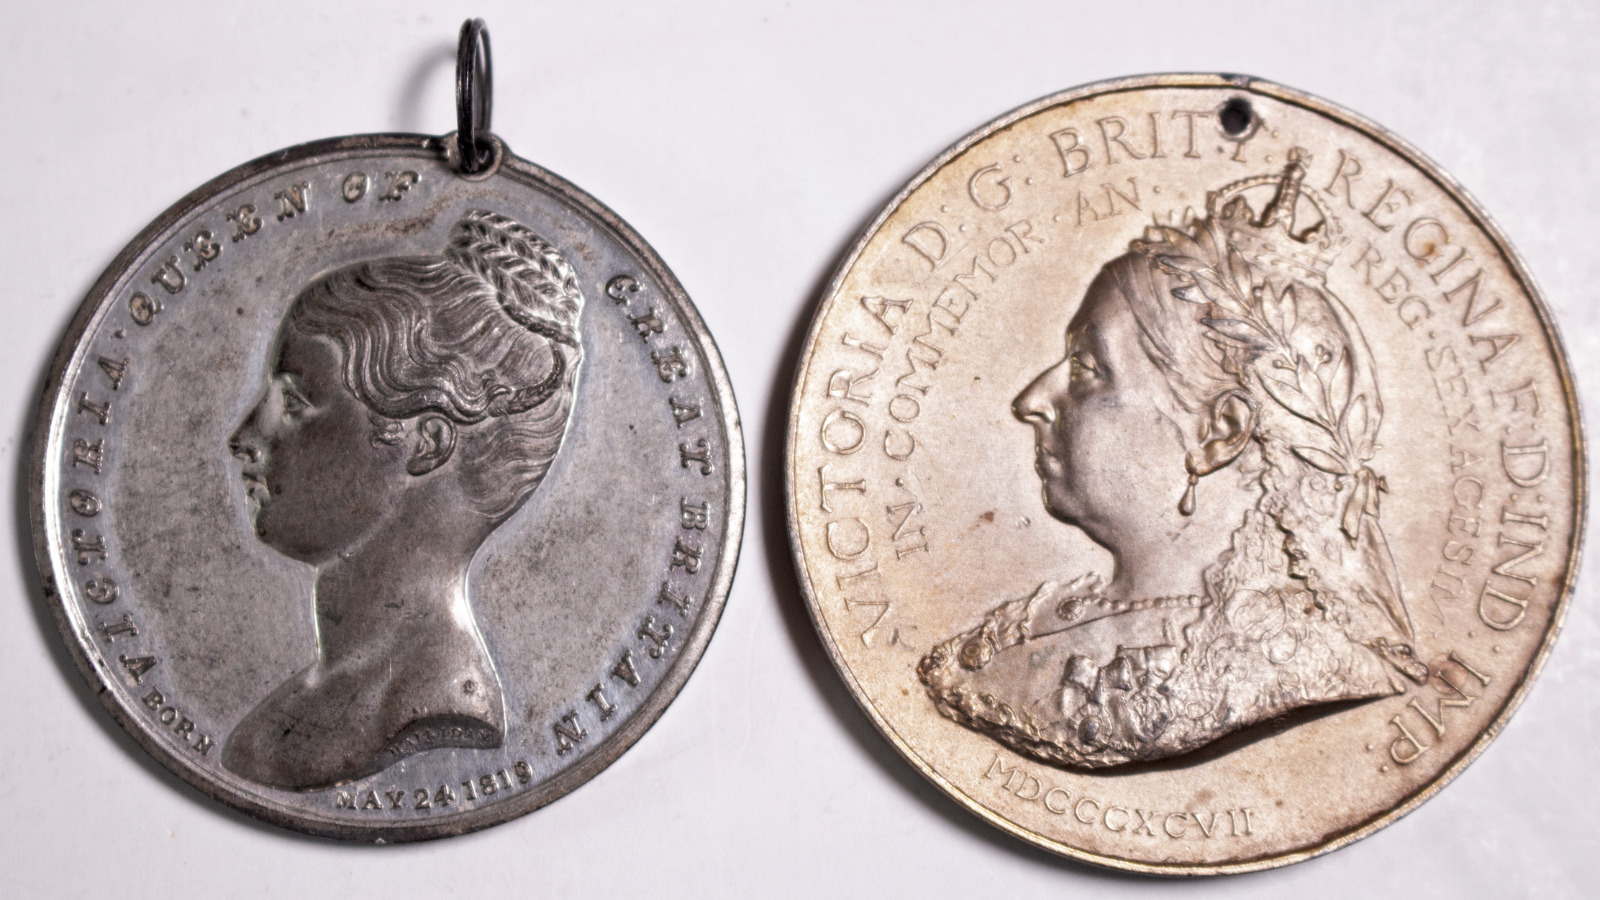 Rare 1838 Queen Victoria Coronation Medal by T. Halliday + Spinks Jubilee Medal